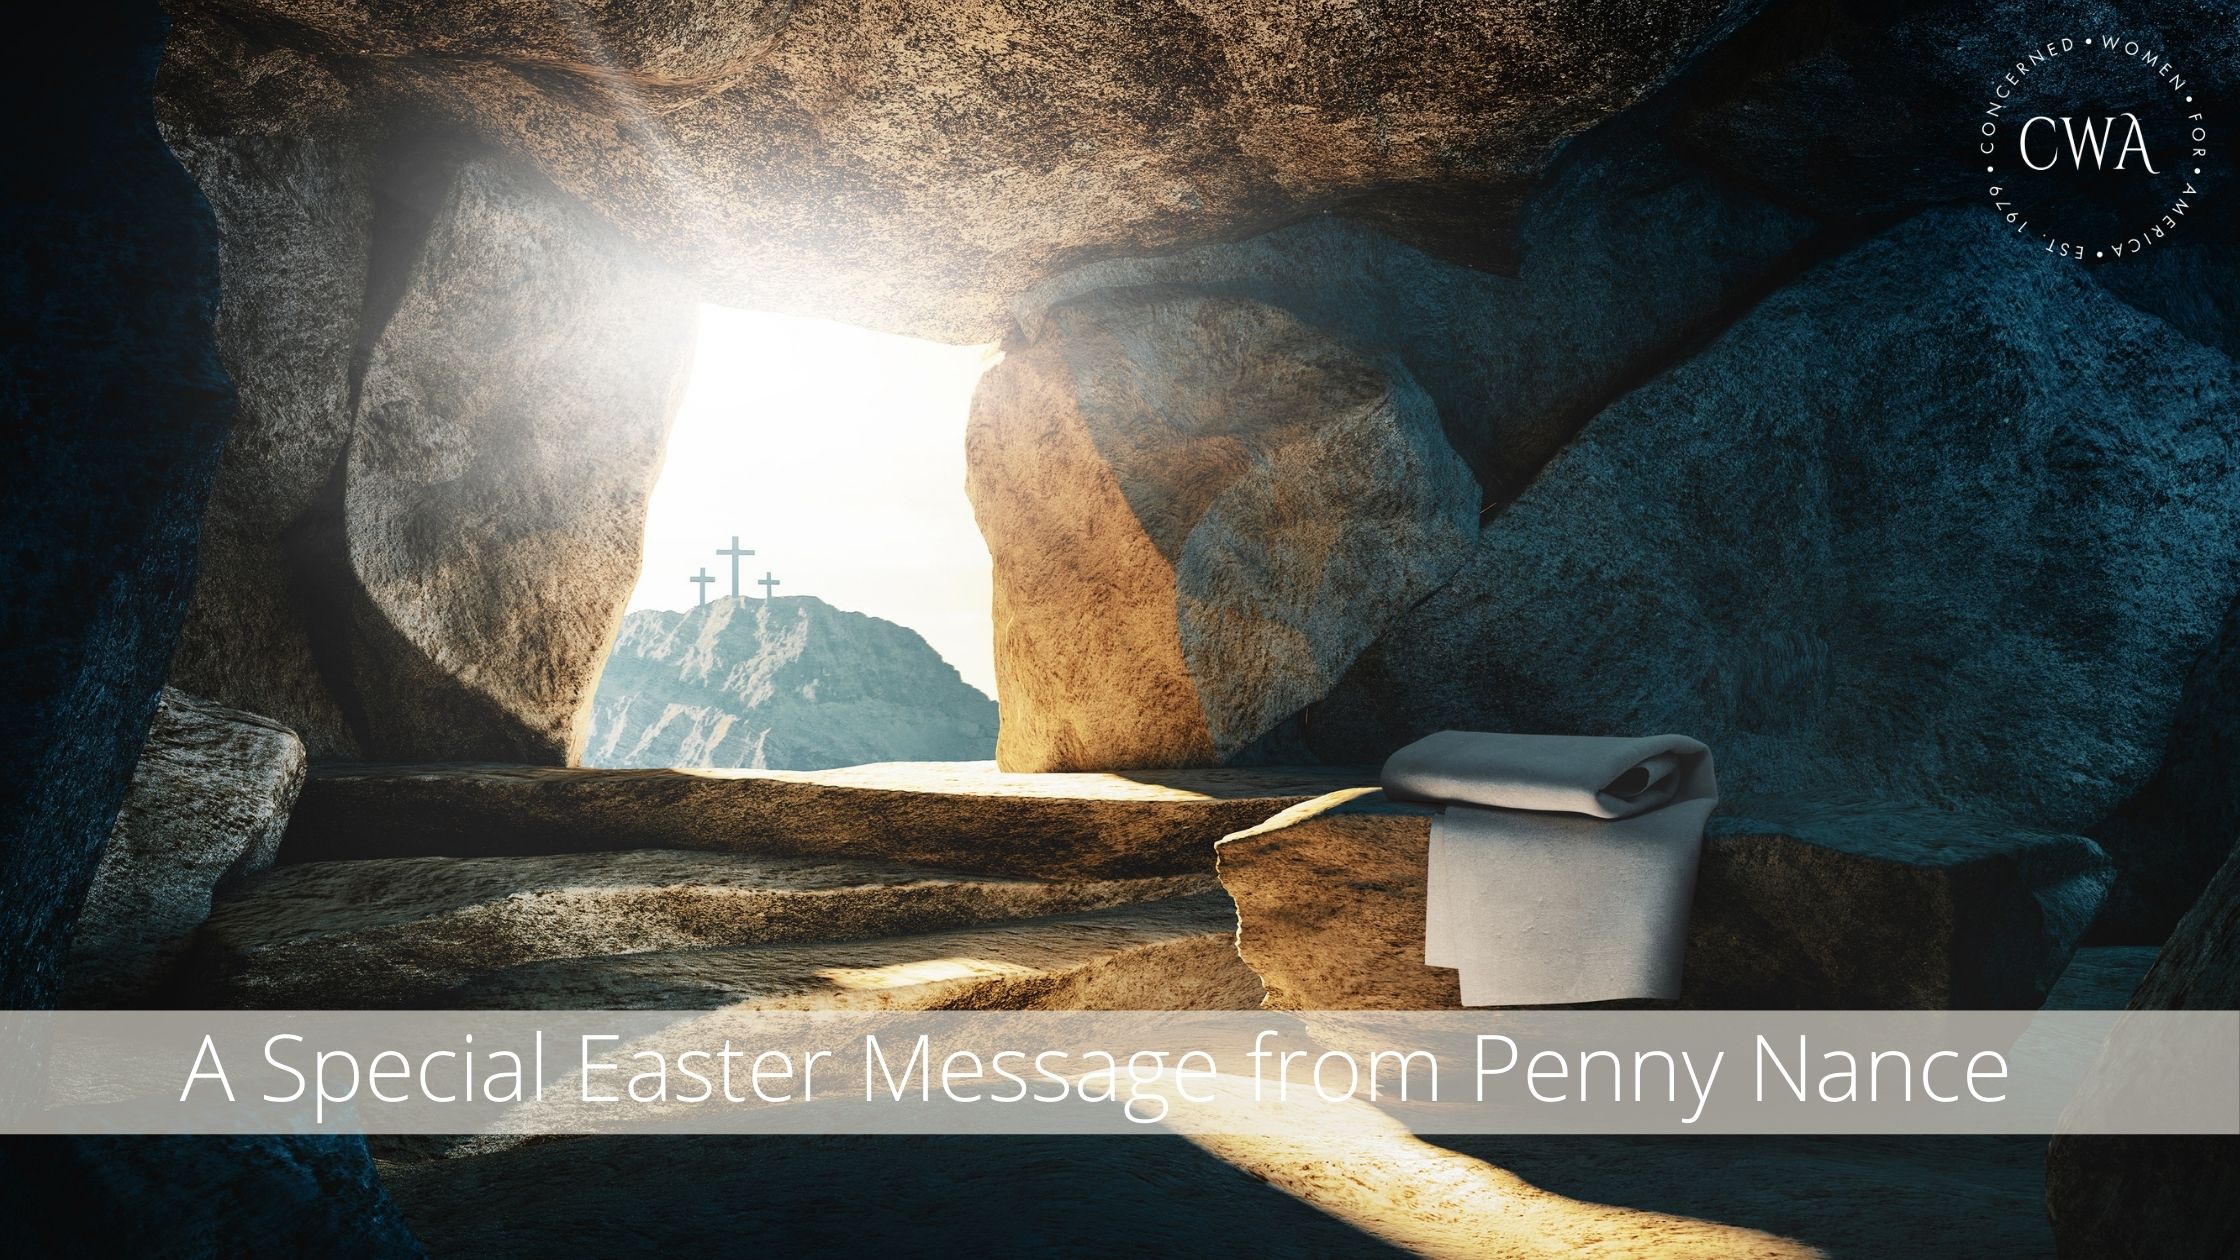 A Special Easter Message from Penny Nance